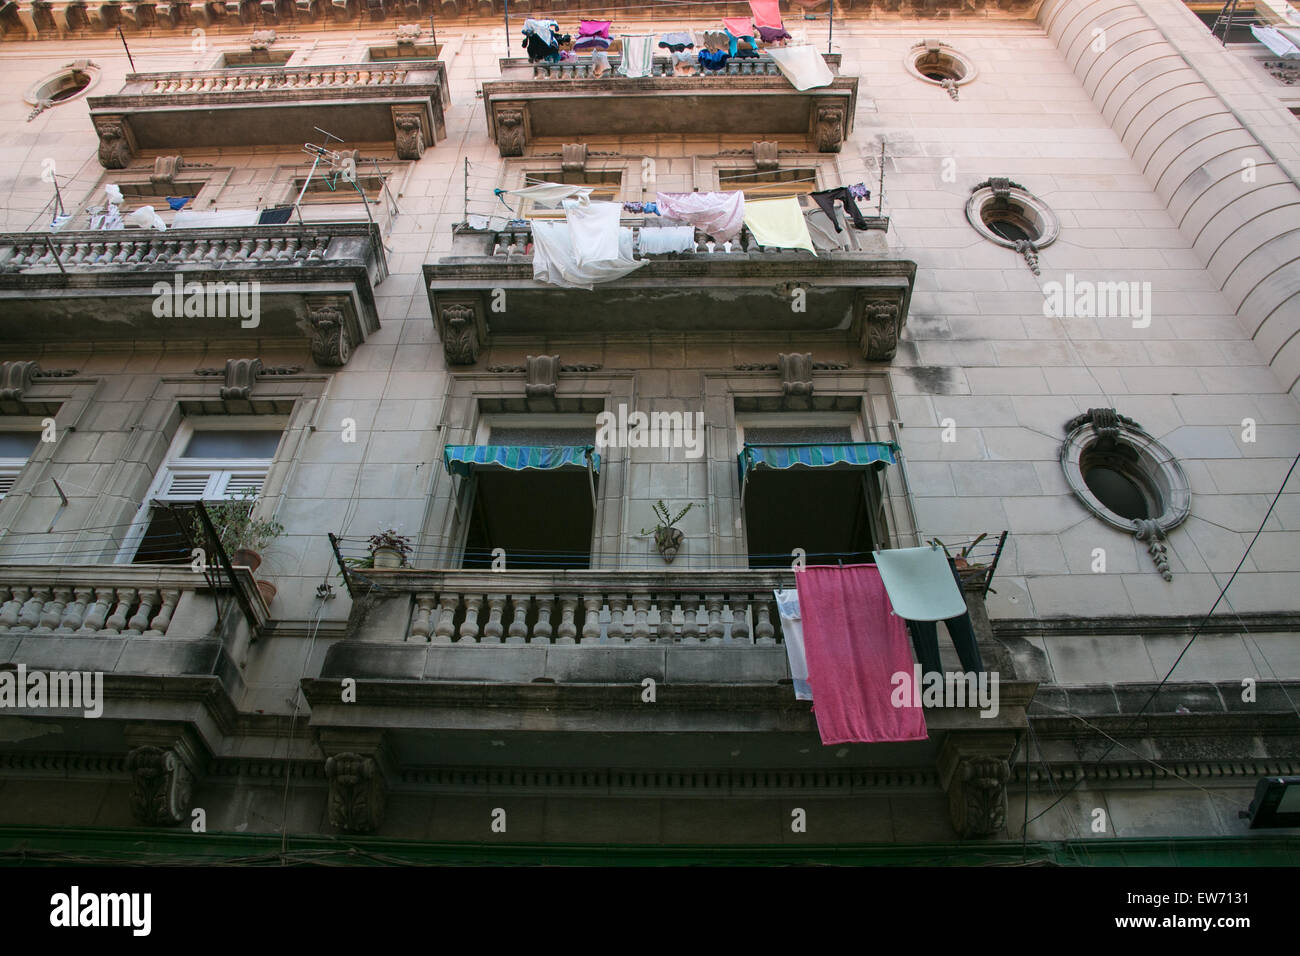 Laundry hanging from balconies in Old Havana, Cuba. Stock Photo